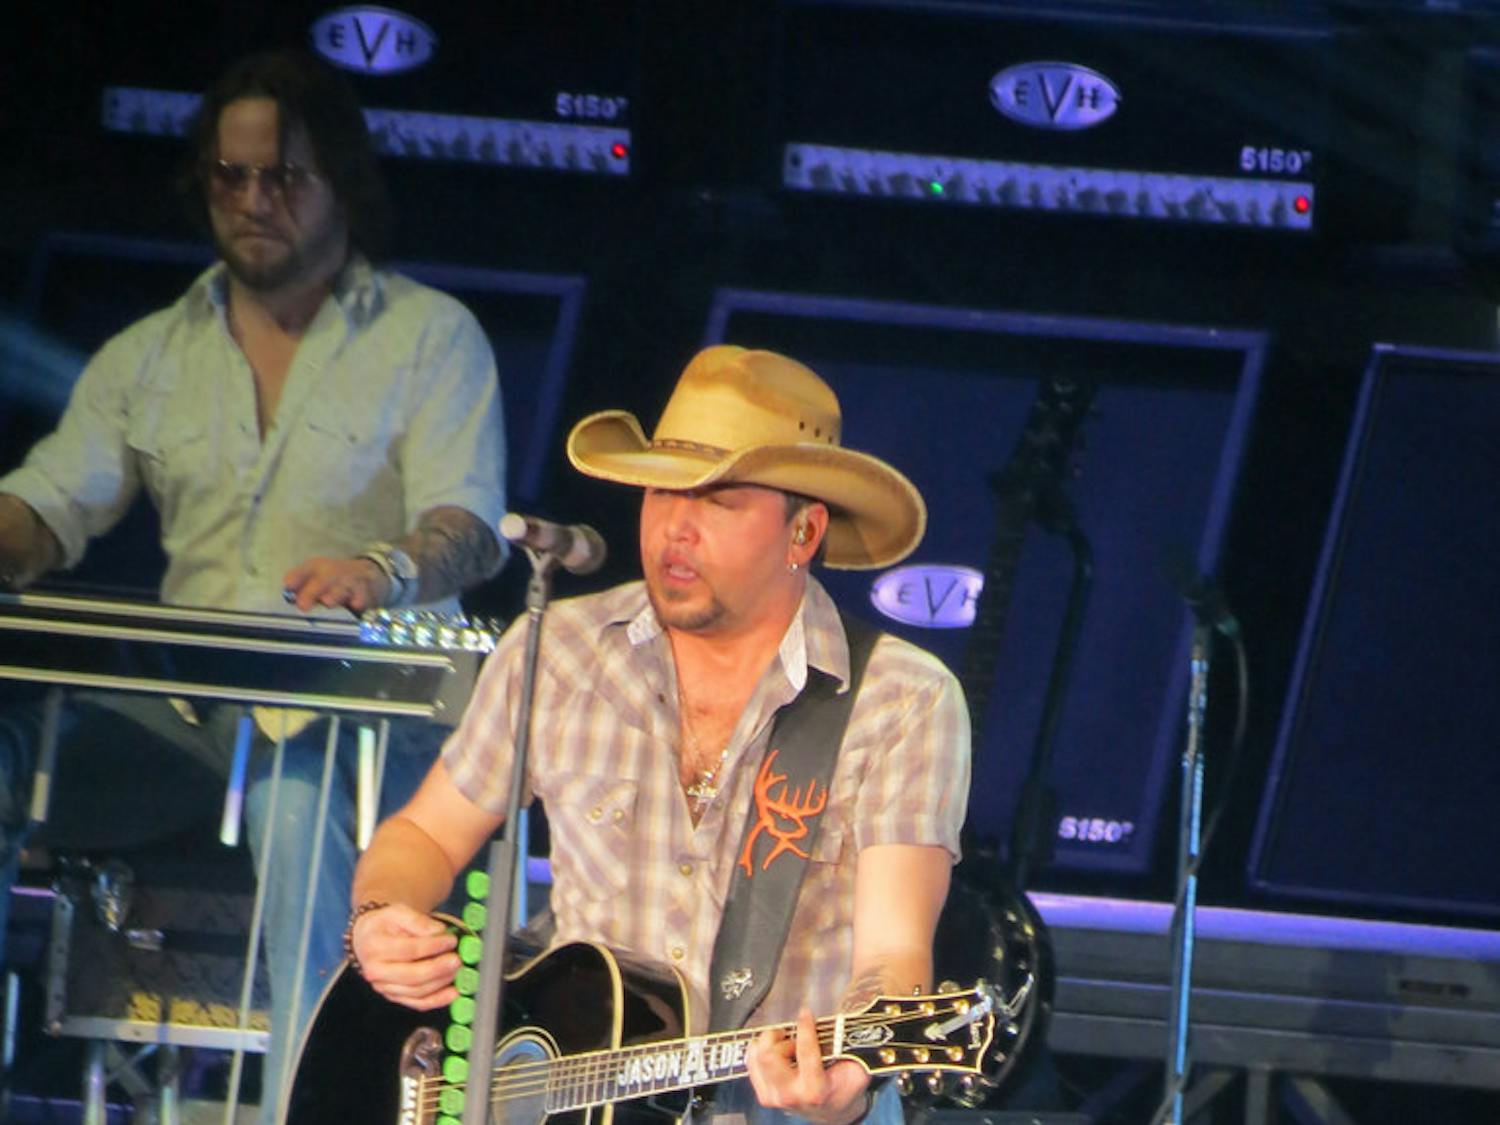 PREVIEW: Jason Aldean to release an album dedicated to Macon